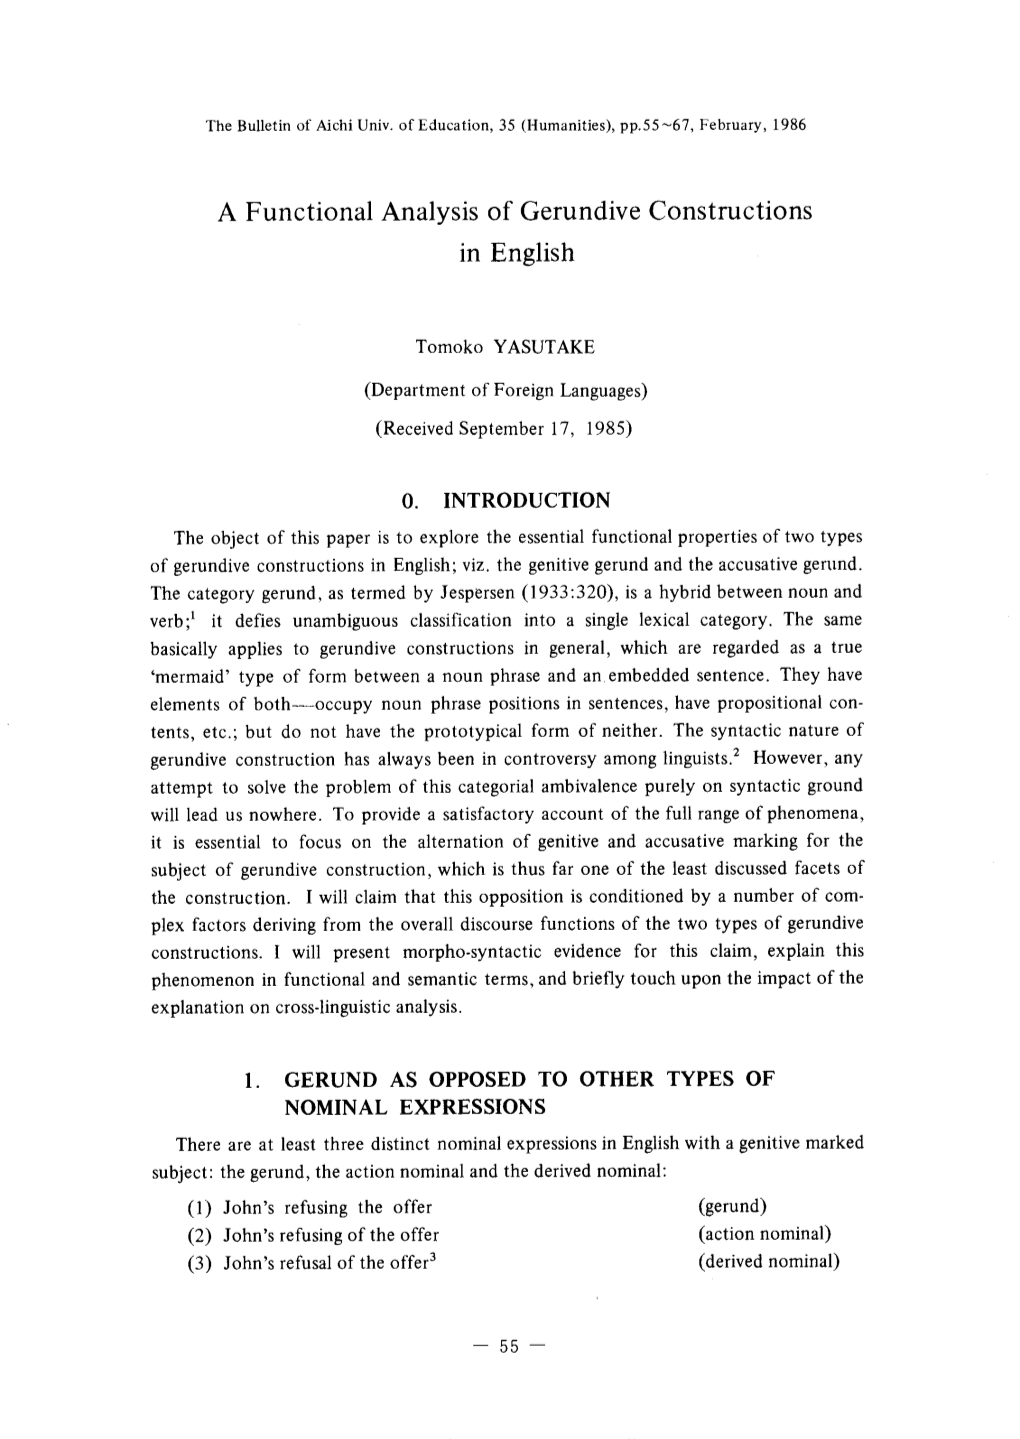 A Functional Analysis of Gerundive Constructions in English